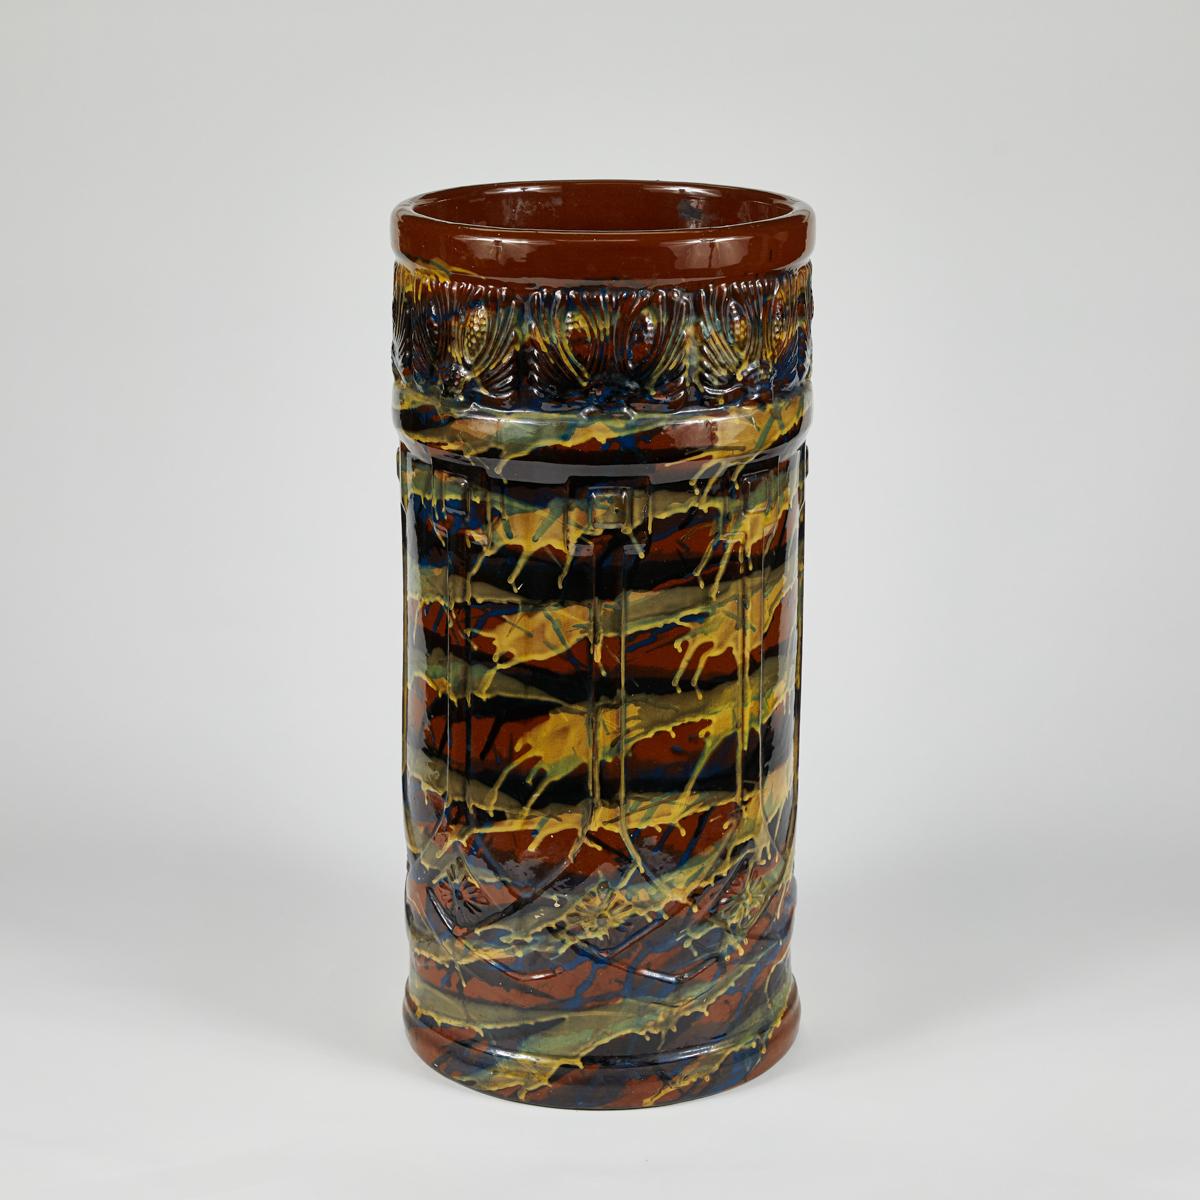 Peters and Reed glazed pottery vase.